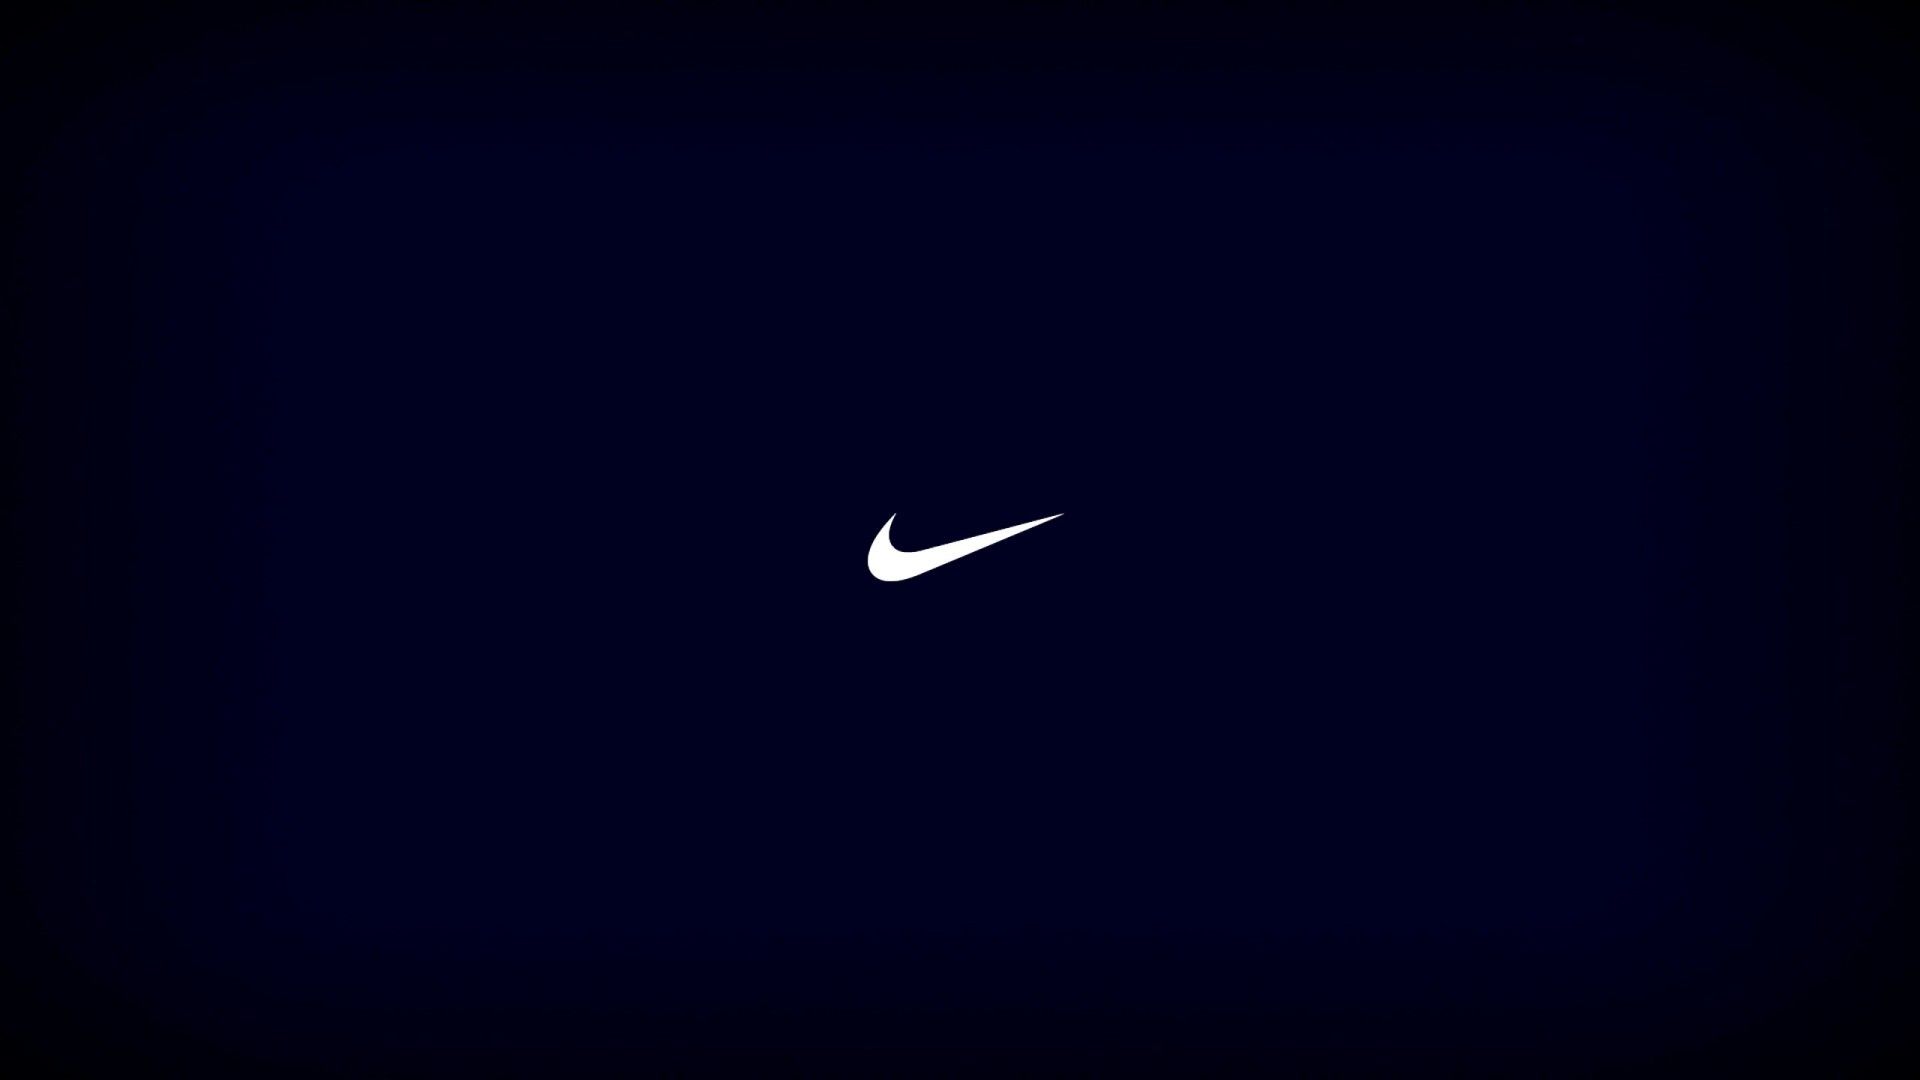 Nike Wallpapers For Laptop - Wallpaper Cave